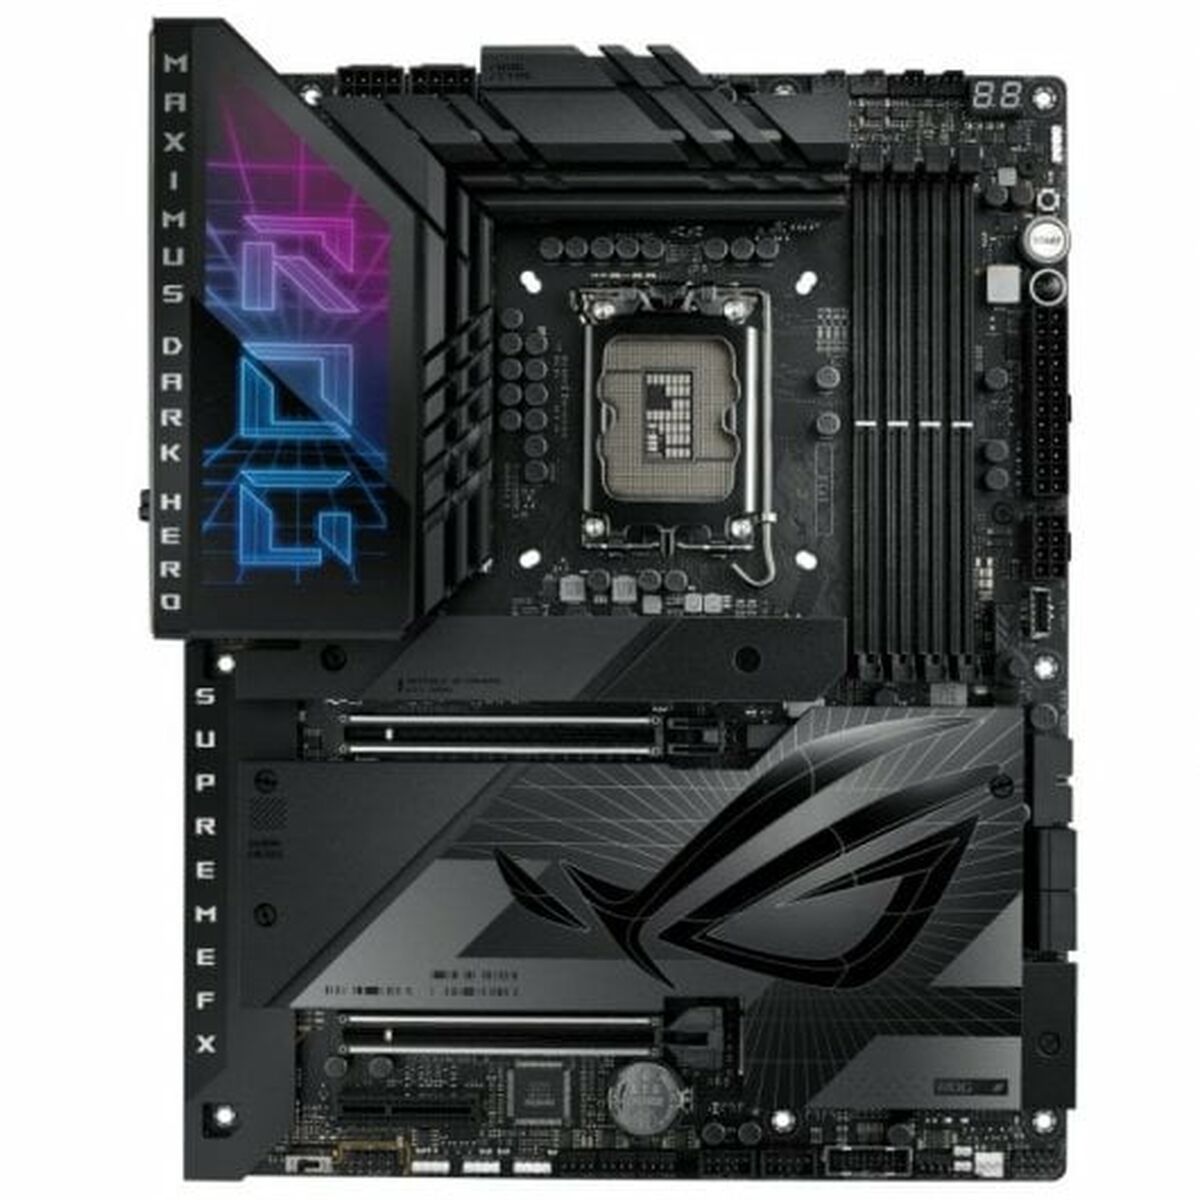 Motherboard Asus  ROG MAXIMUS Z790 Intel Z790 Express LGA 1700, Asus, Computing, Components, motherboard-asus-rog-maximus-z790-intel-z790-express-lga-1700, Brand_Asus, category-reference-2609, category-reference-2803, category-reference-2804, category-reference-t-19685, category-reference-t-19912, category-reference-t-21360, category-reference-t-25660, computers / components, Condition_NEW, Price_700 - 800, Teleworking, RiotNook